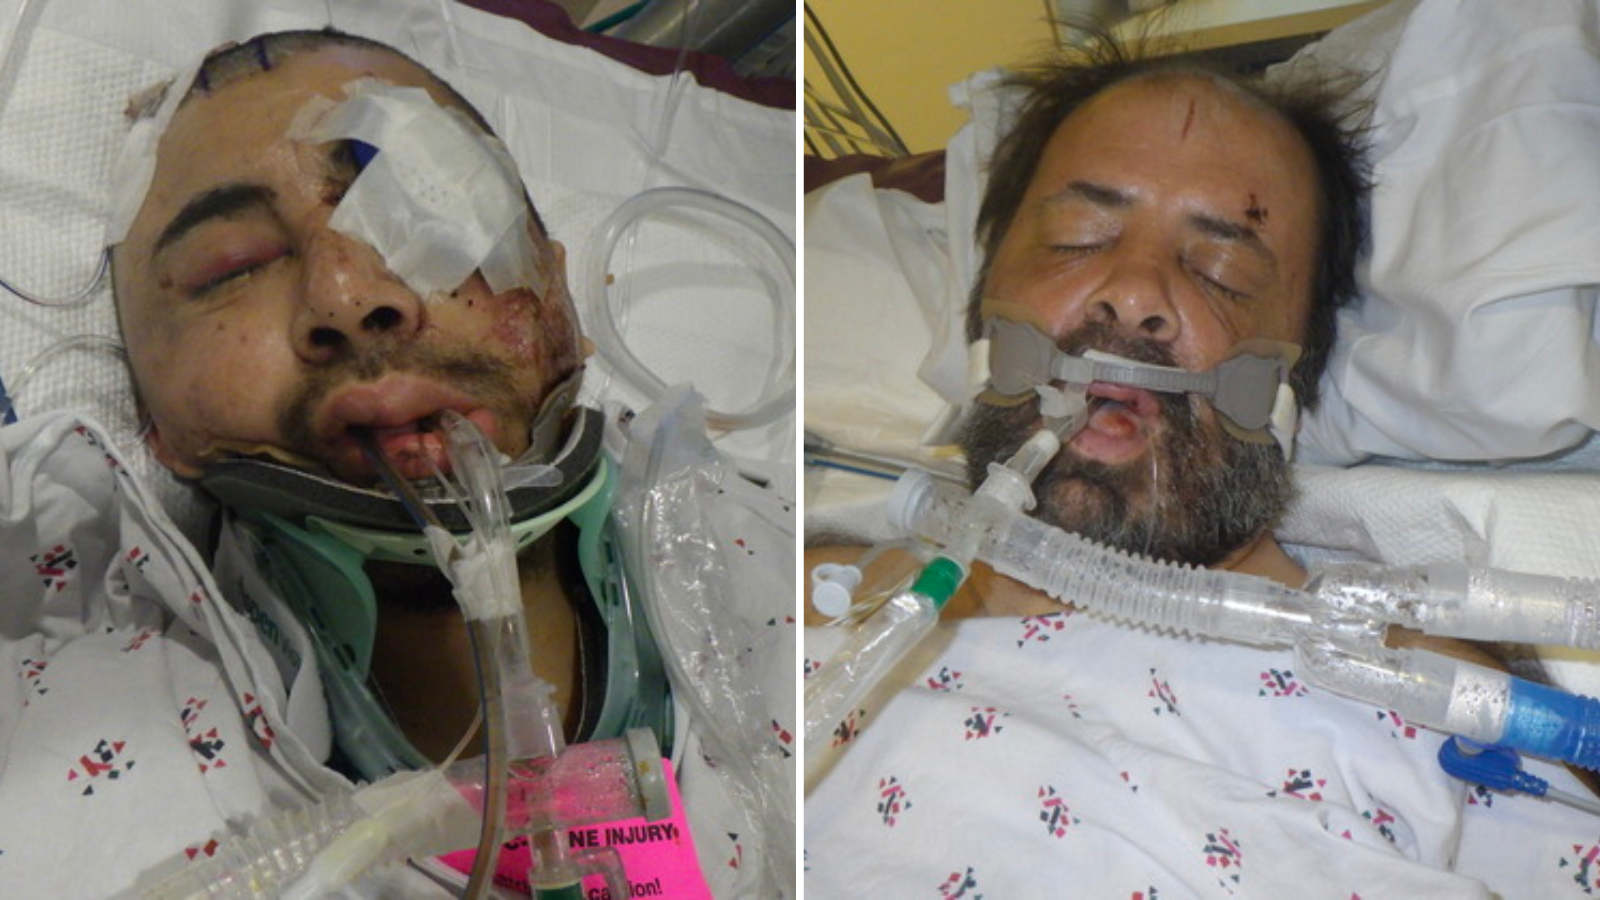 Los Angeles General Medical Center in Boyle Heights is asking for the public's help to identify two patients who have been hospitalized for several days. (Los Angeles County Department of Health Services)